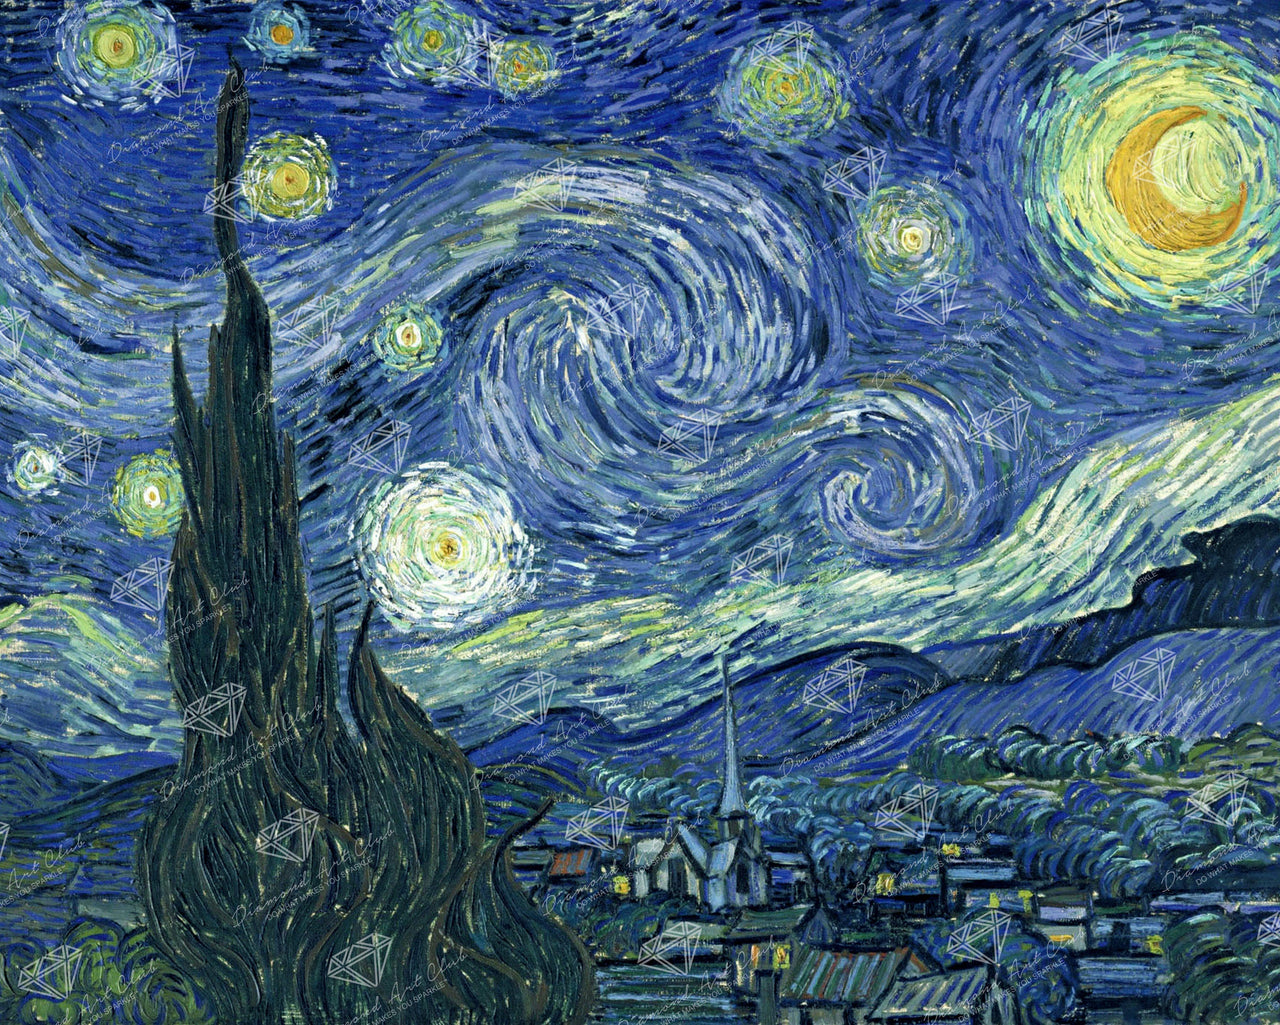 Diamond Painting Starry Night 14.6" x 18.1" (37cm x 46cm) / Square With 27 Colors including 1 AB / 26,245